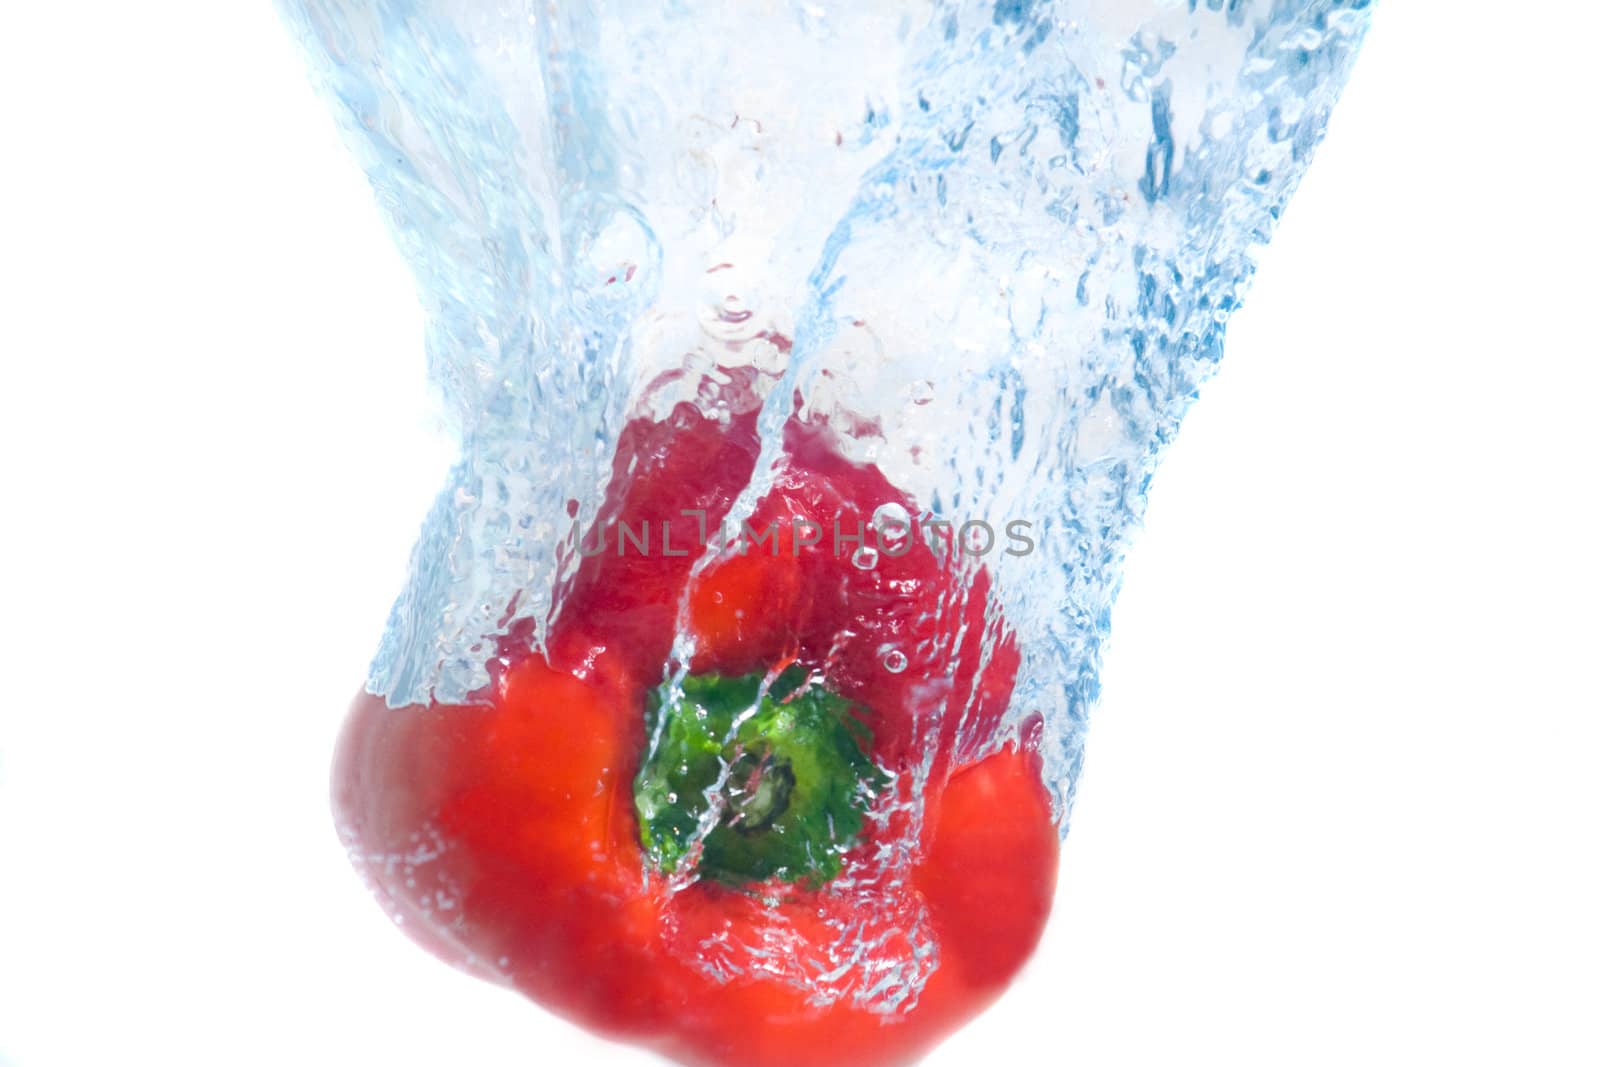 Splash of red pepper in the water.